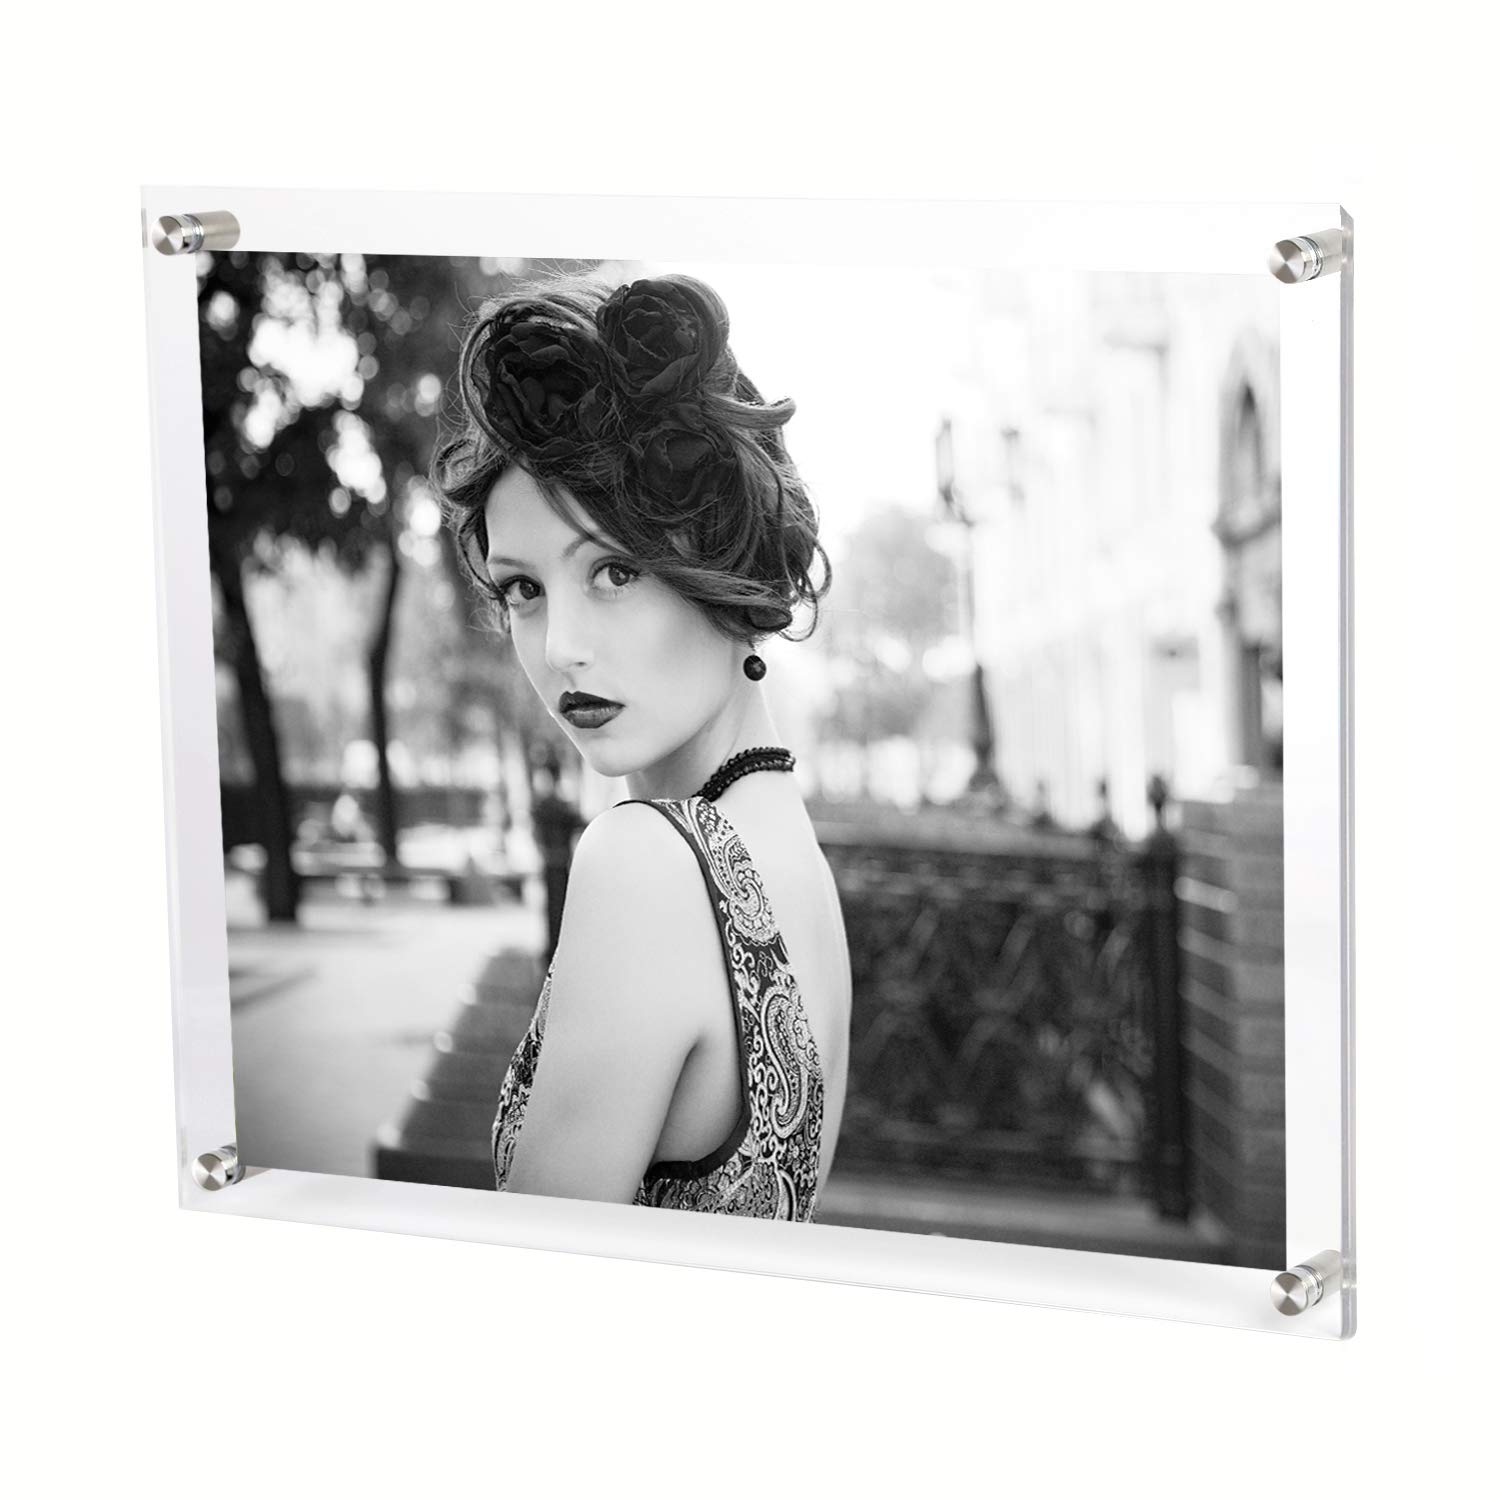 Bloberey 11x14 Acrylic Picture Frames Wall Mount Photo Frame Frameless Clear Floating Frame for Document Certificate Artwork(4 Pack)